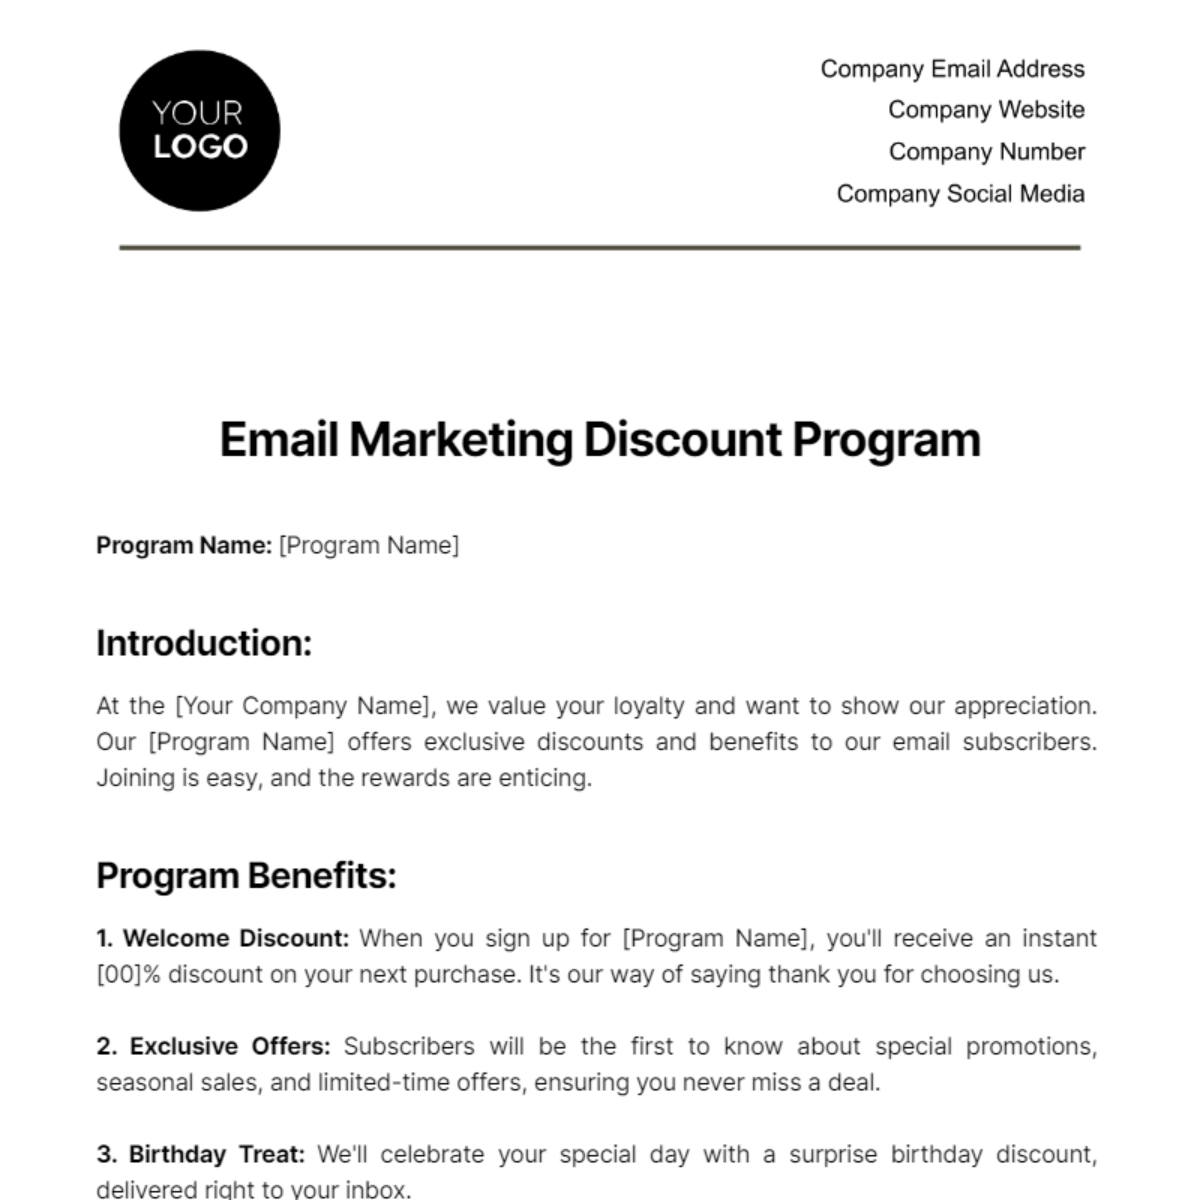 Free Email Marketing Discount Program Template